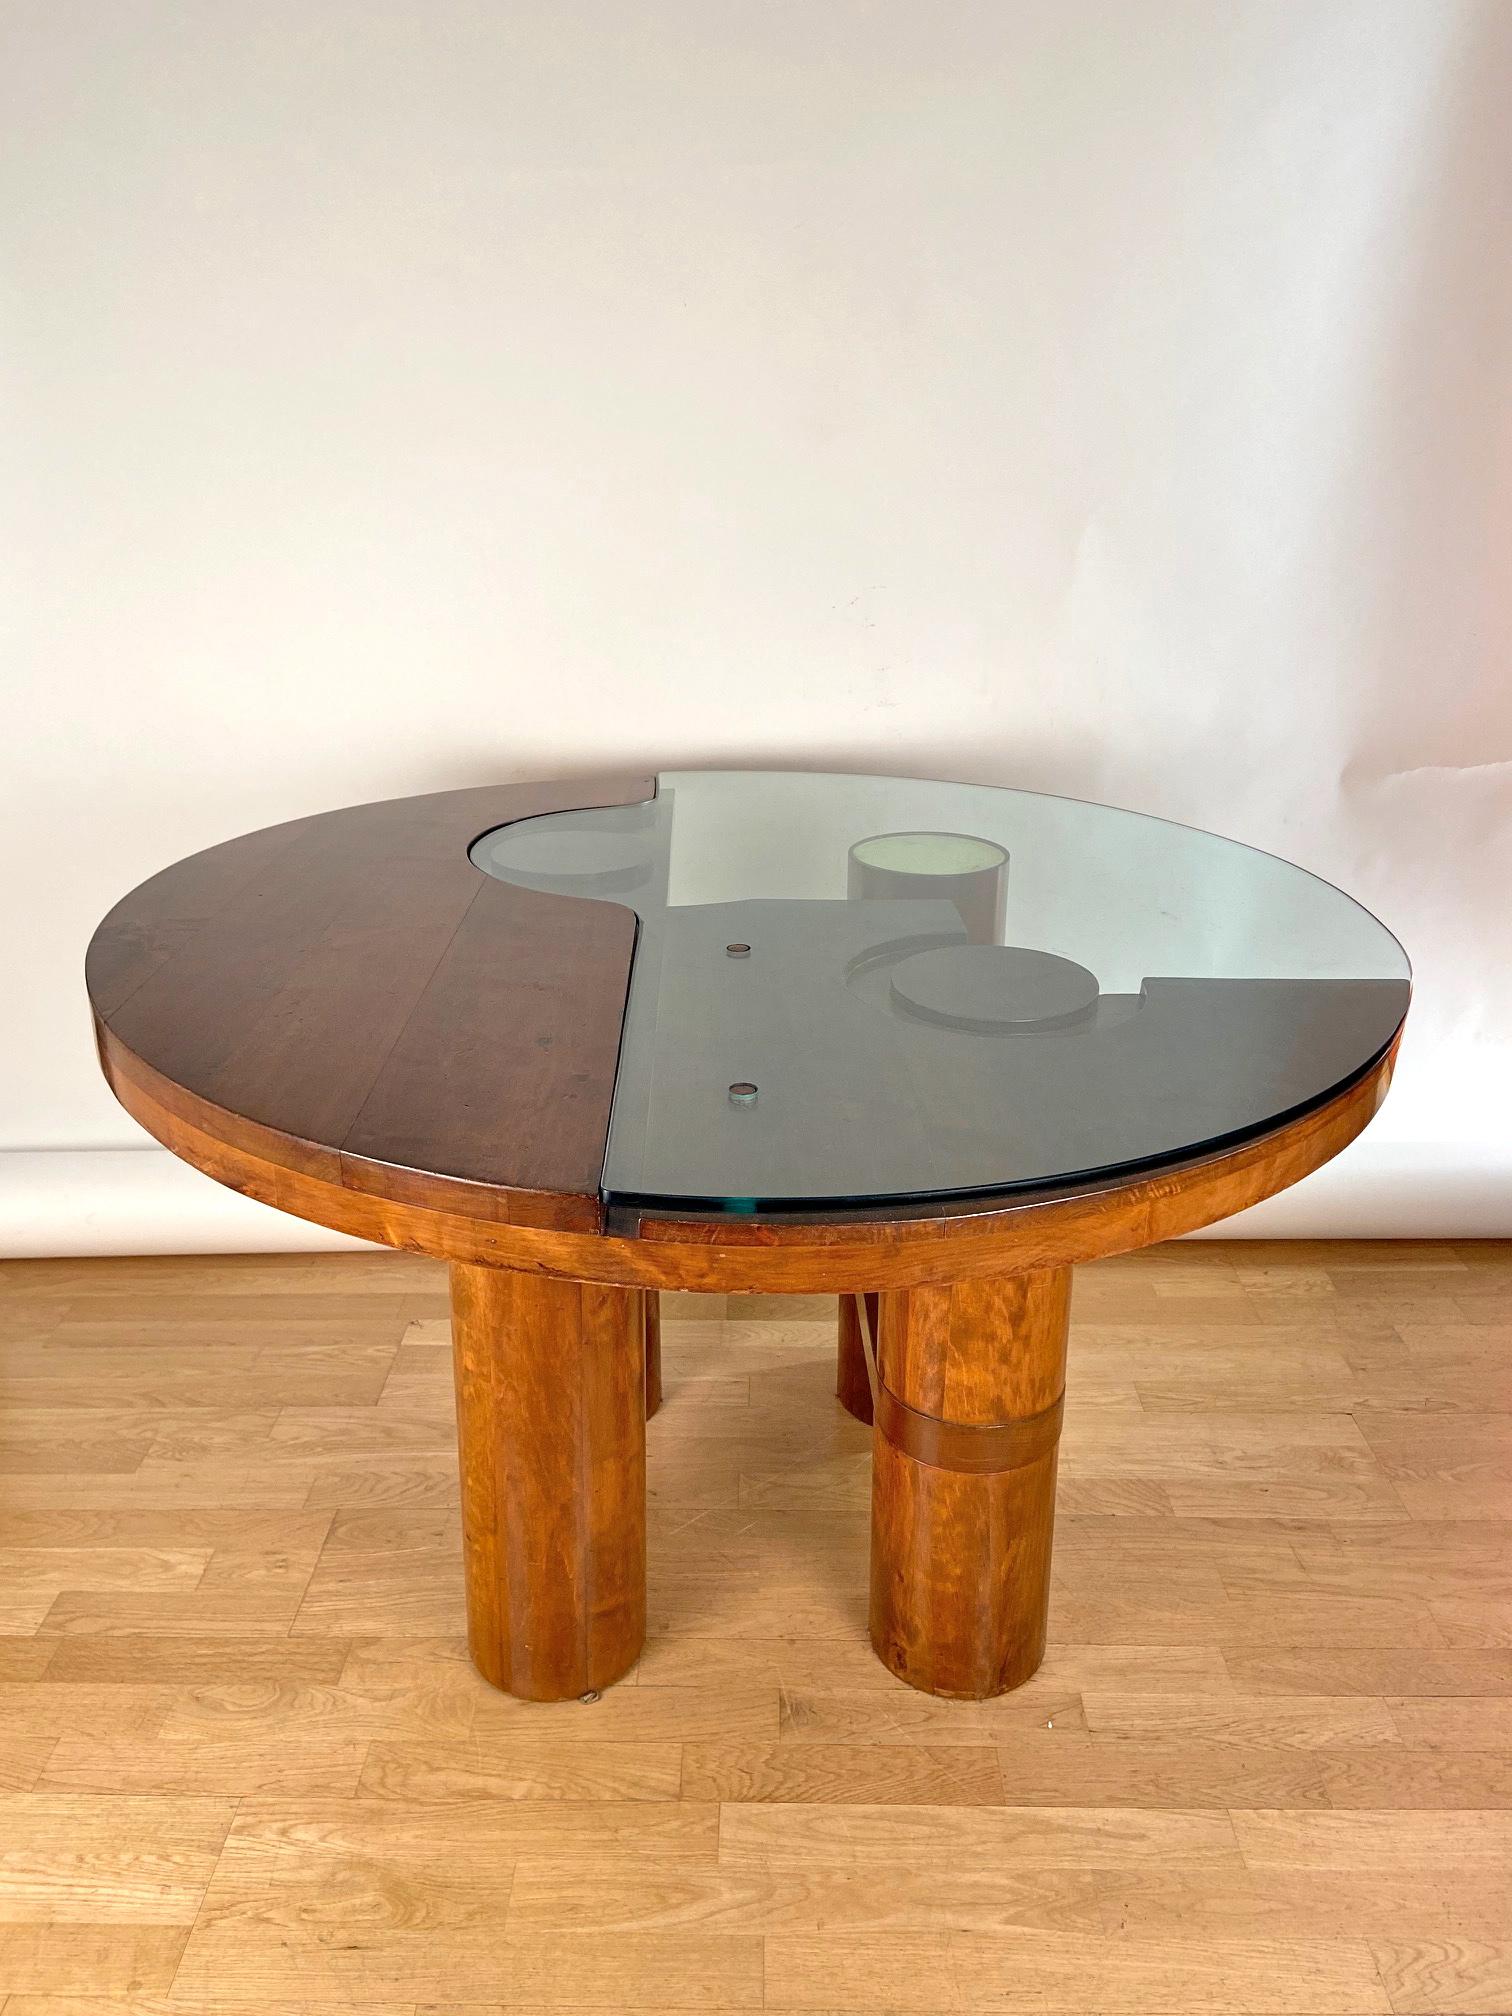 Italian Mid-Century Modern Center/Dining Walnut Table Attributed to N & Patuzzi NP Group